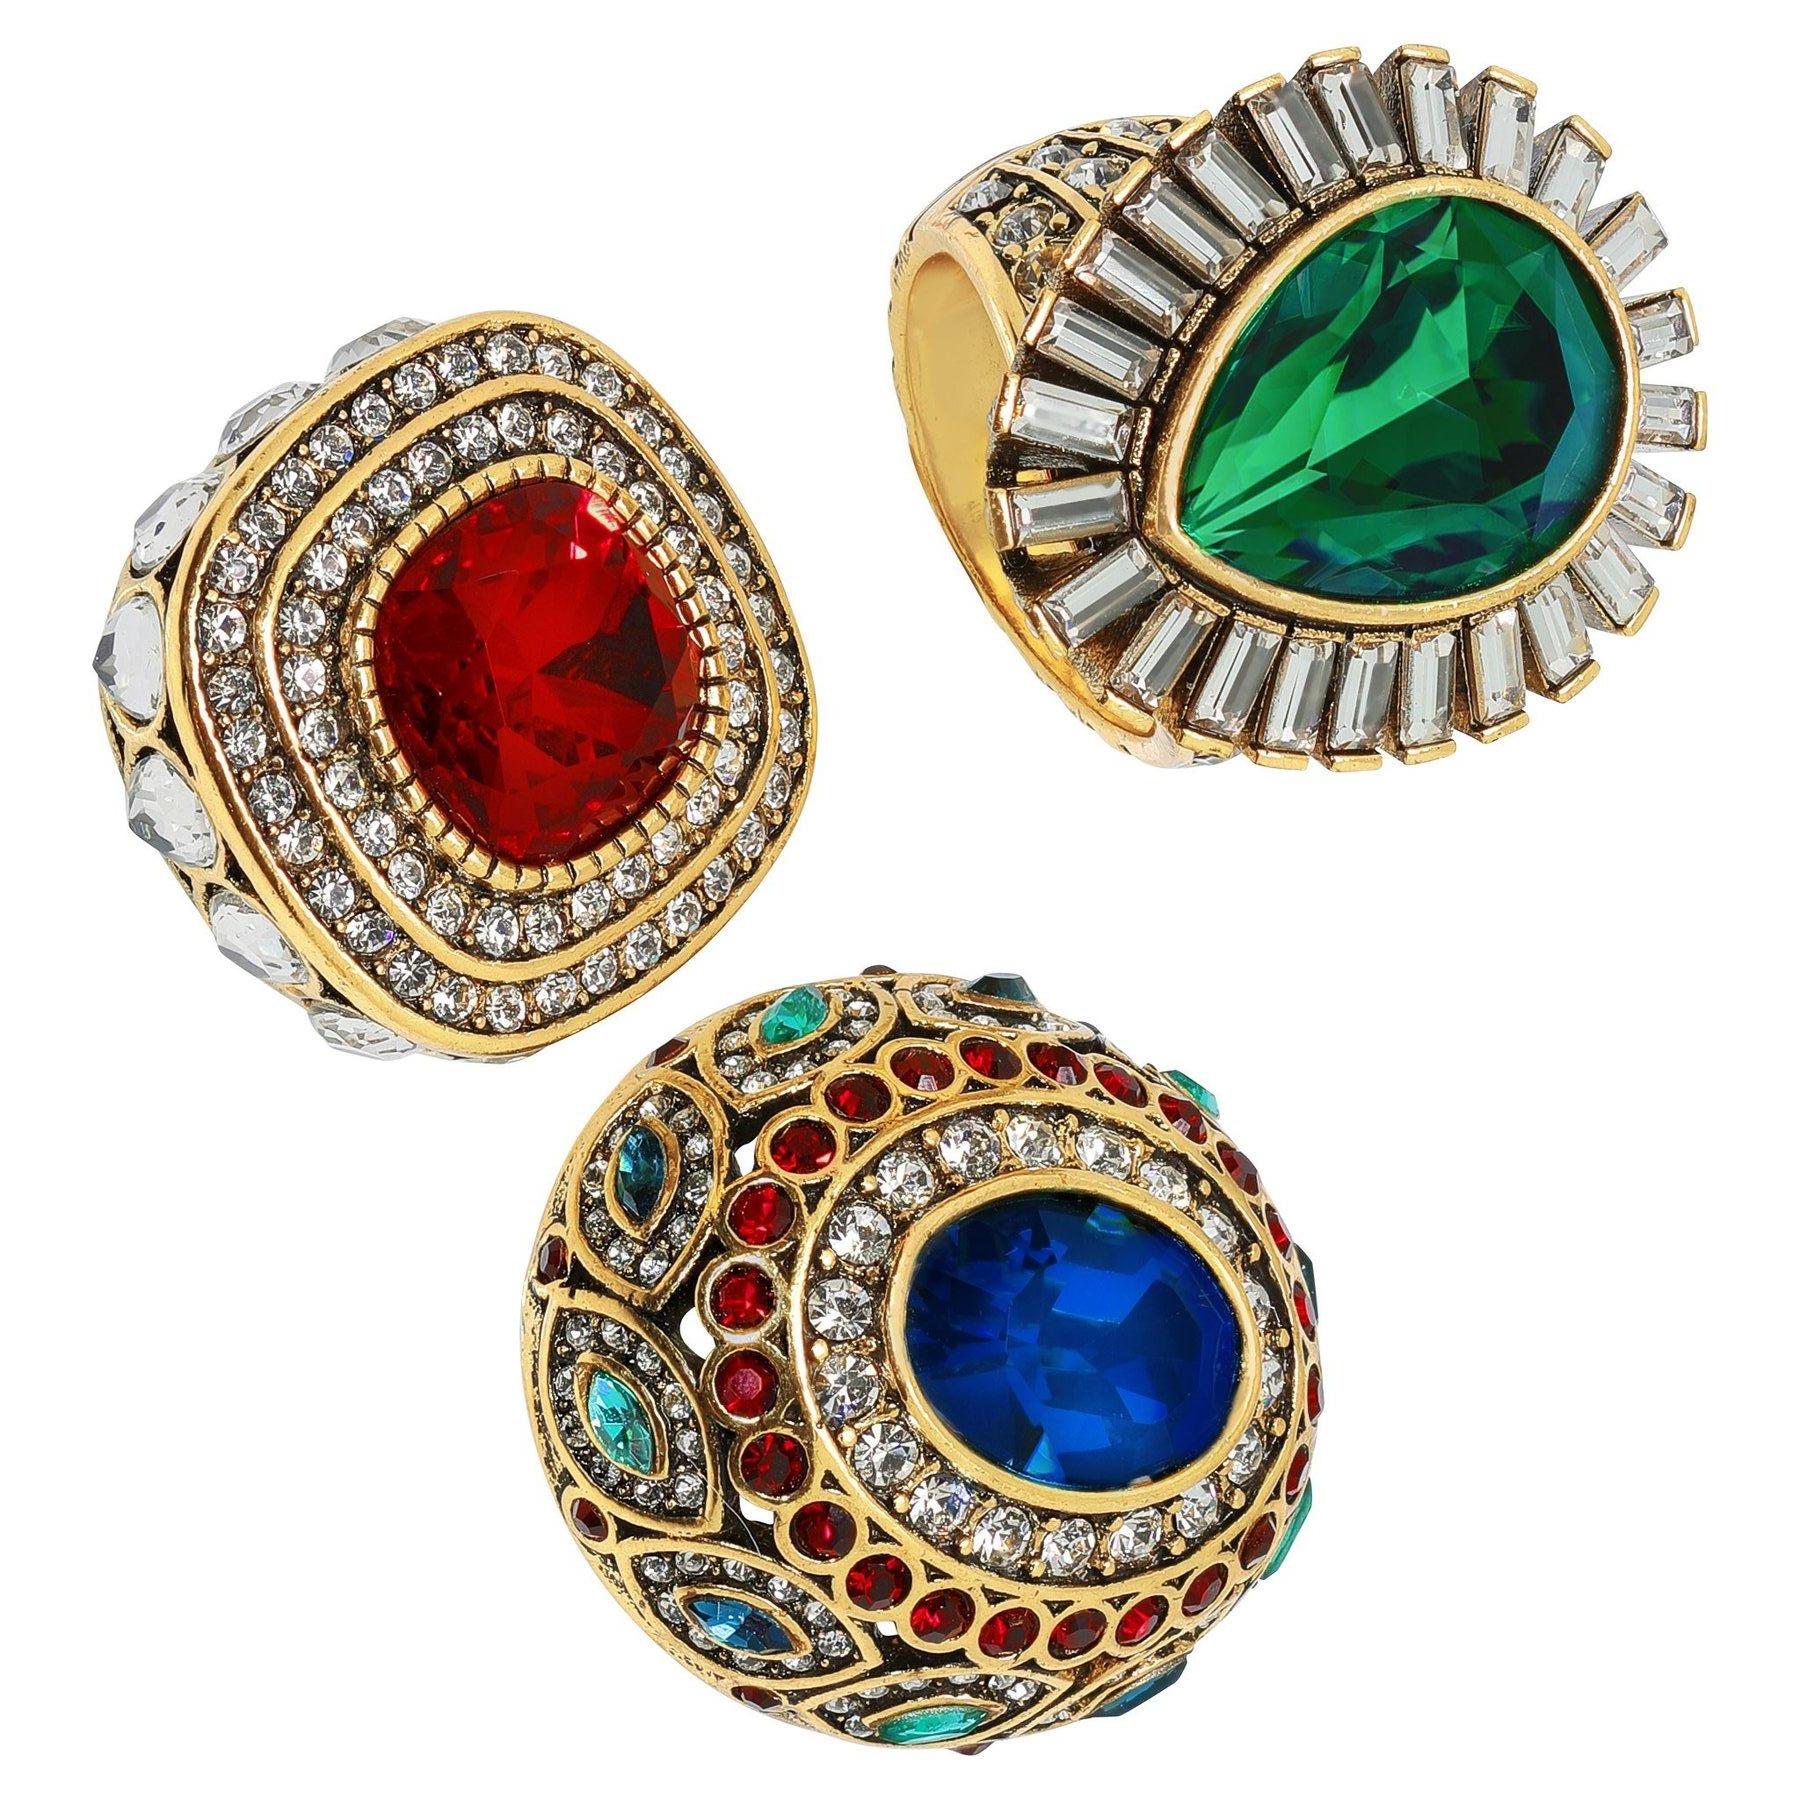 Heidi Daus Enchante Magnetic Ring Set of 3 Size 8 RED VERSION

Inspired by the self expression & opulence of the art deco era, Heidi's best selling 